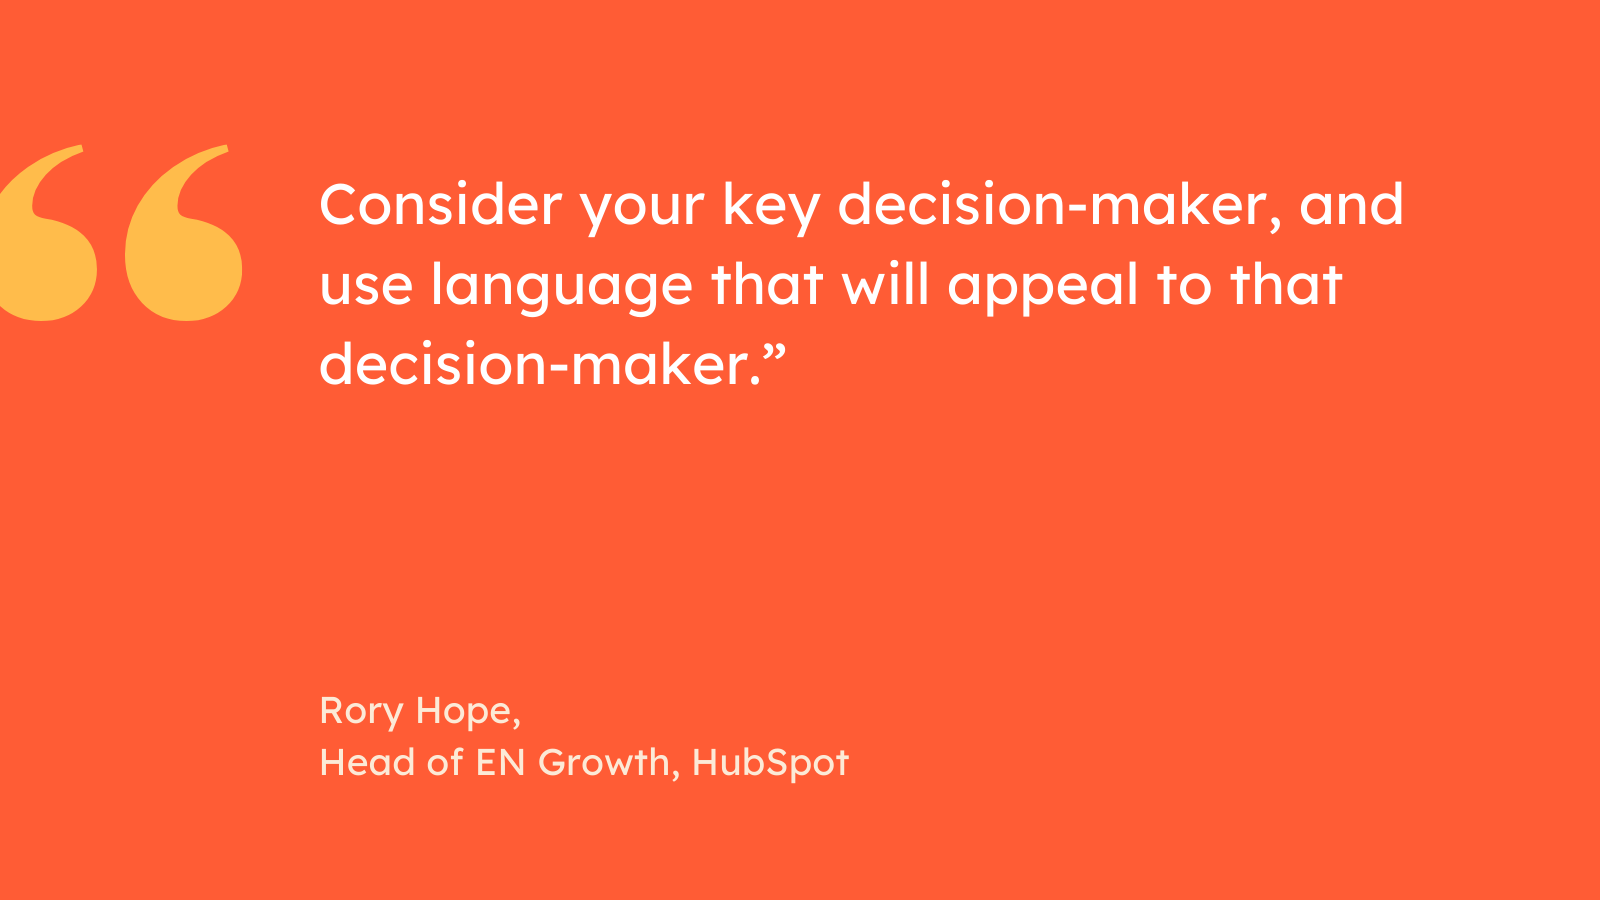 “Consider your key decision-maker, and use language that will appeal to that decision-maker.” Rory Hope, Head of EN Growth, HubSpot